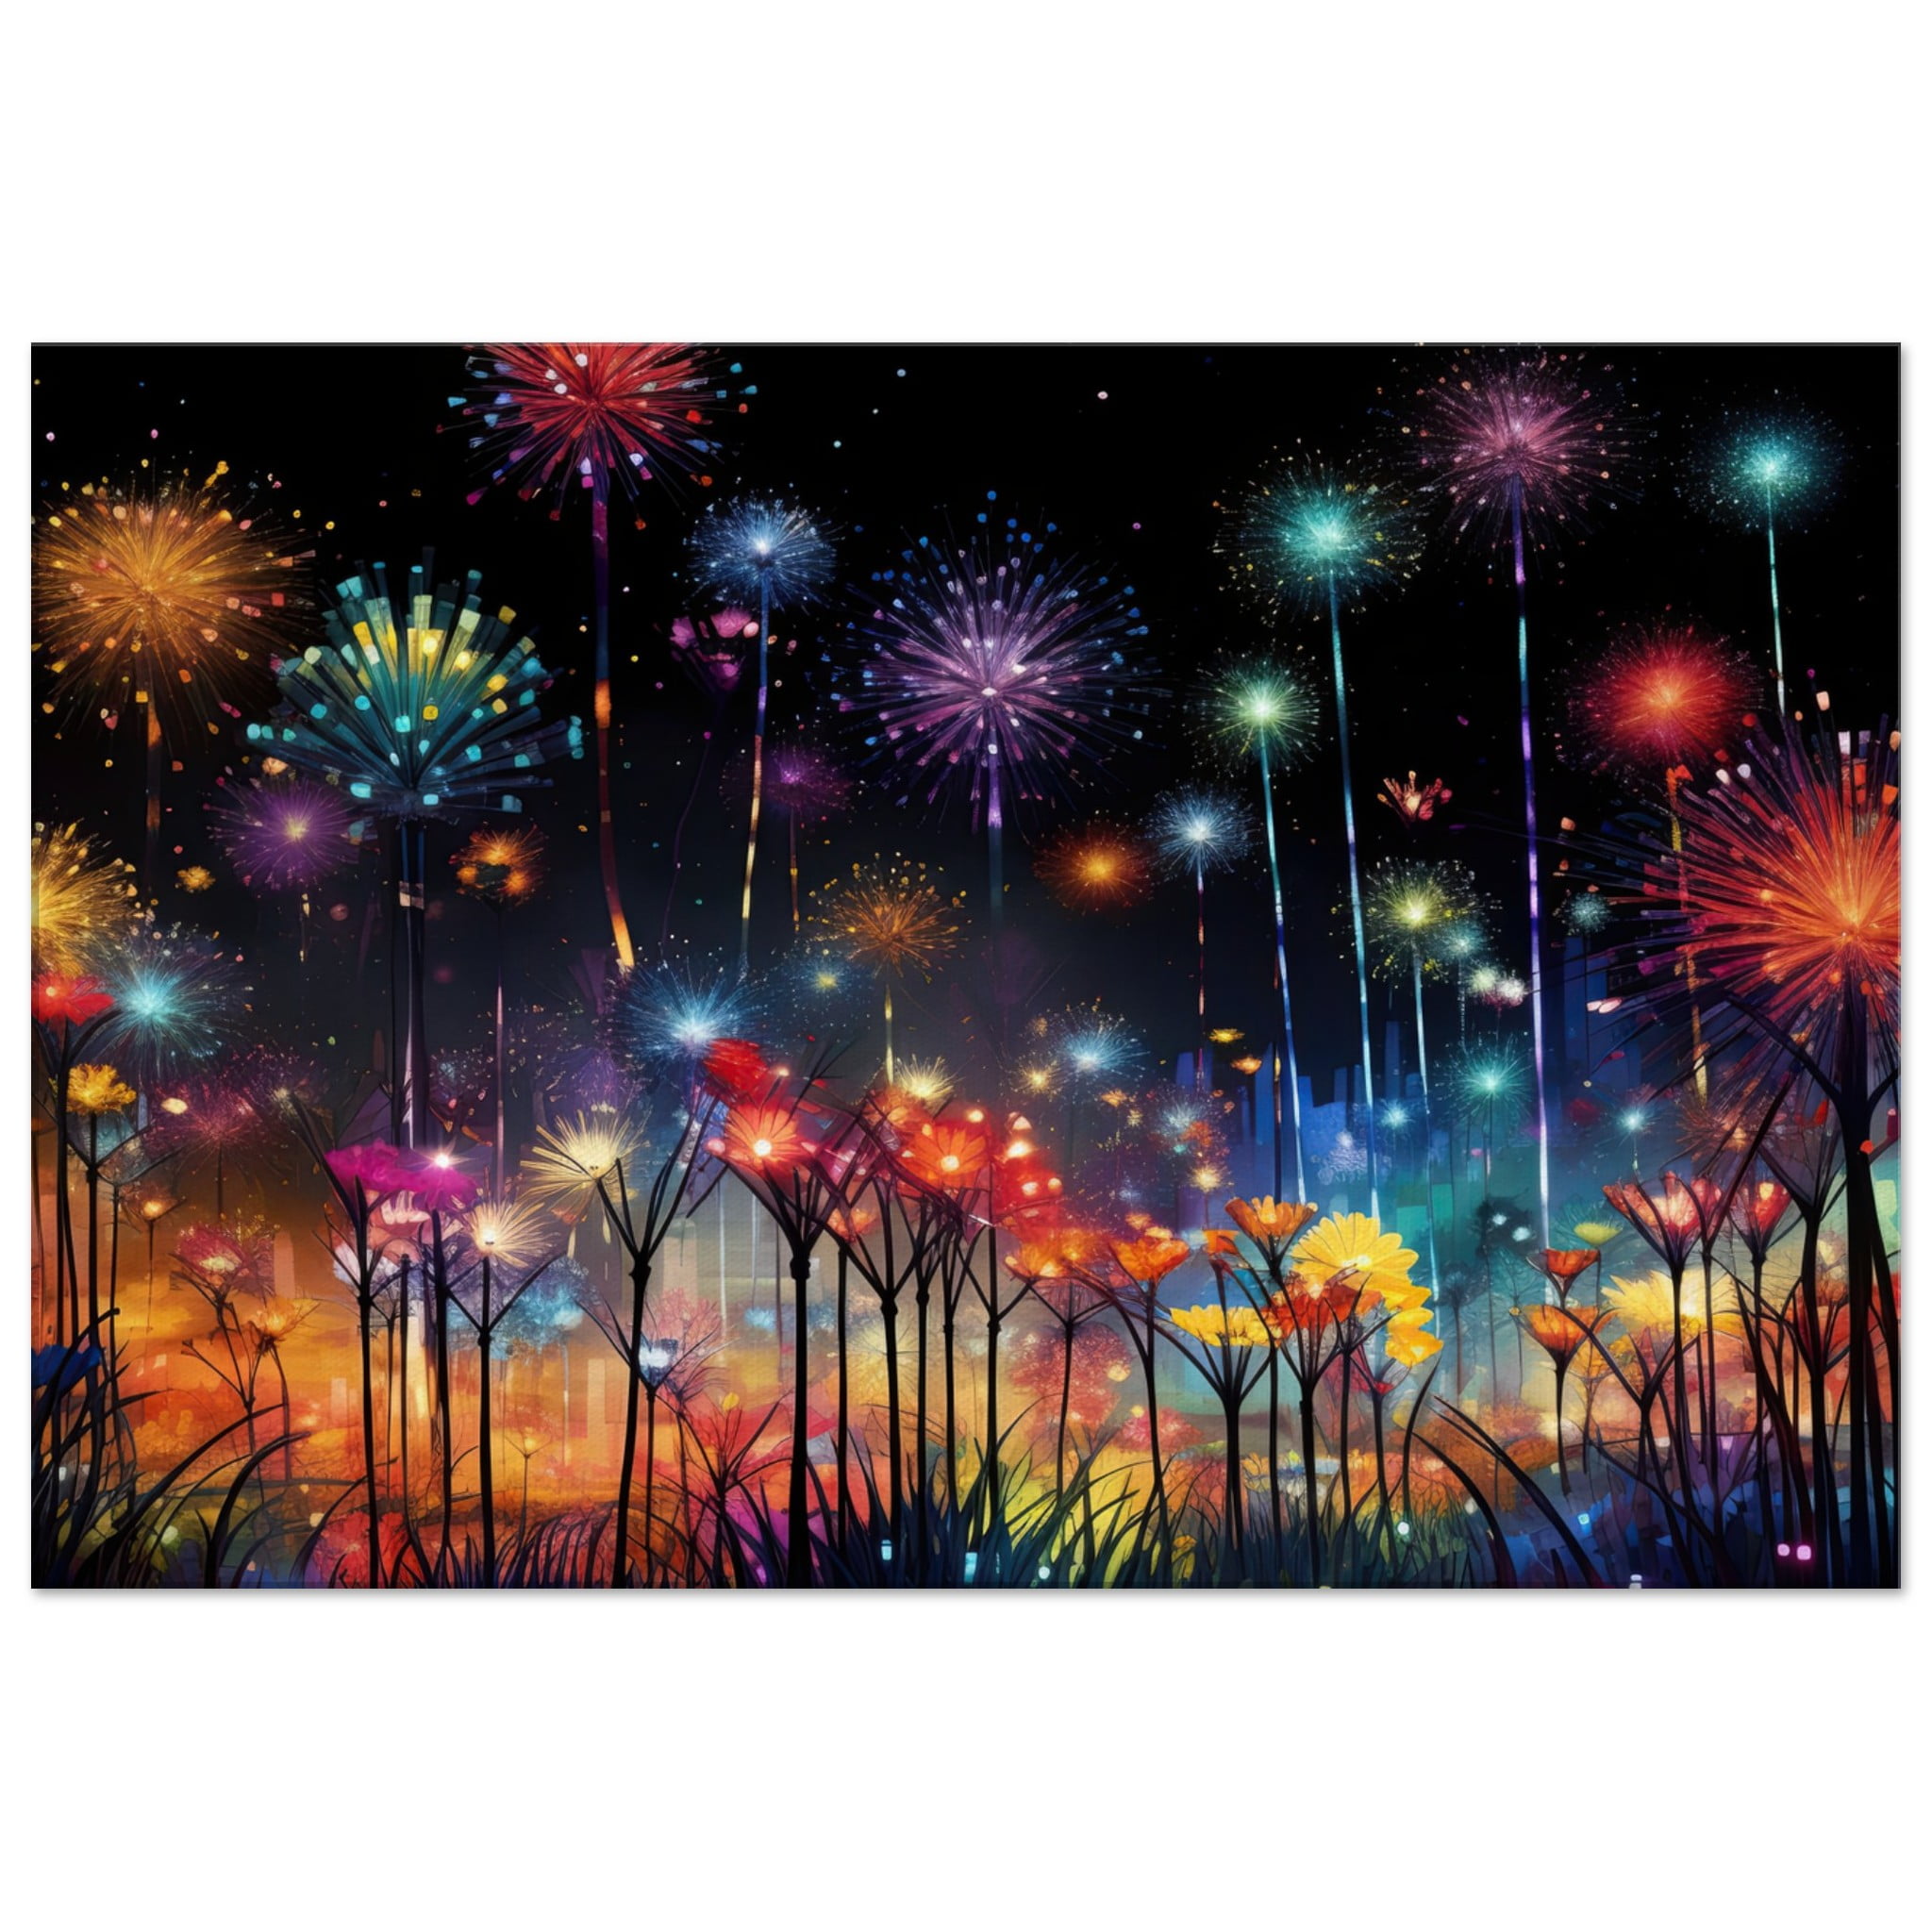 Fireworks and Flowers of Light and Color – Art Canvas Print – 60×90 cm / 24×36″, Slim